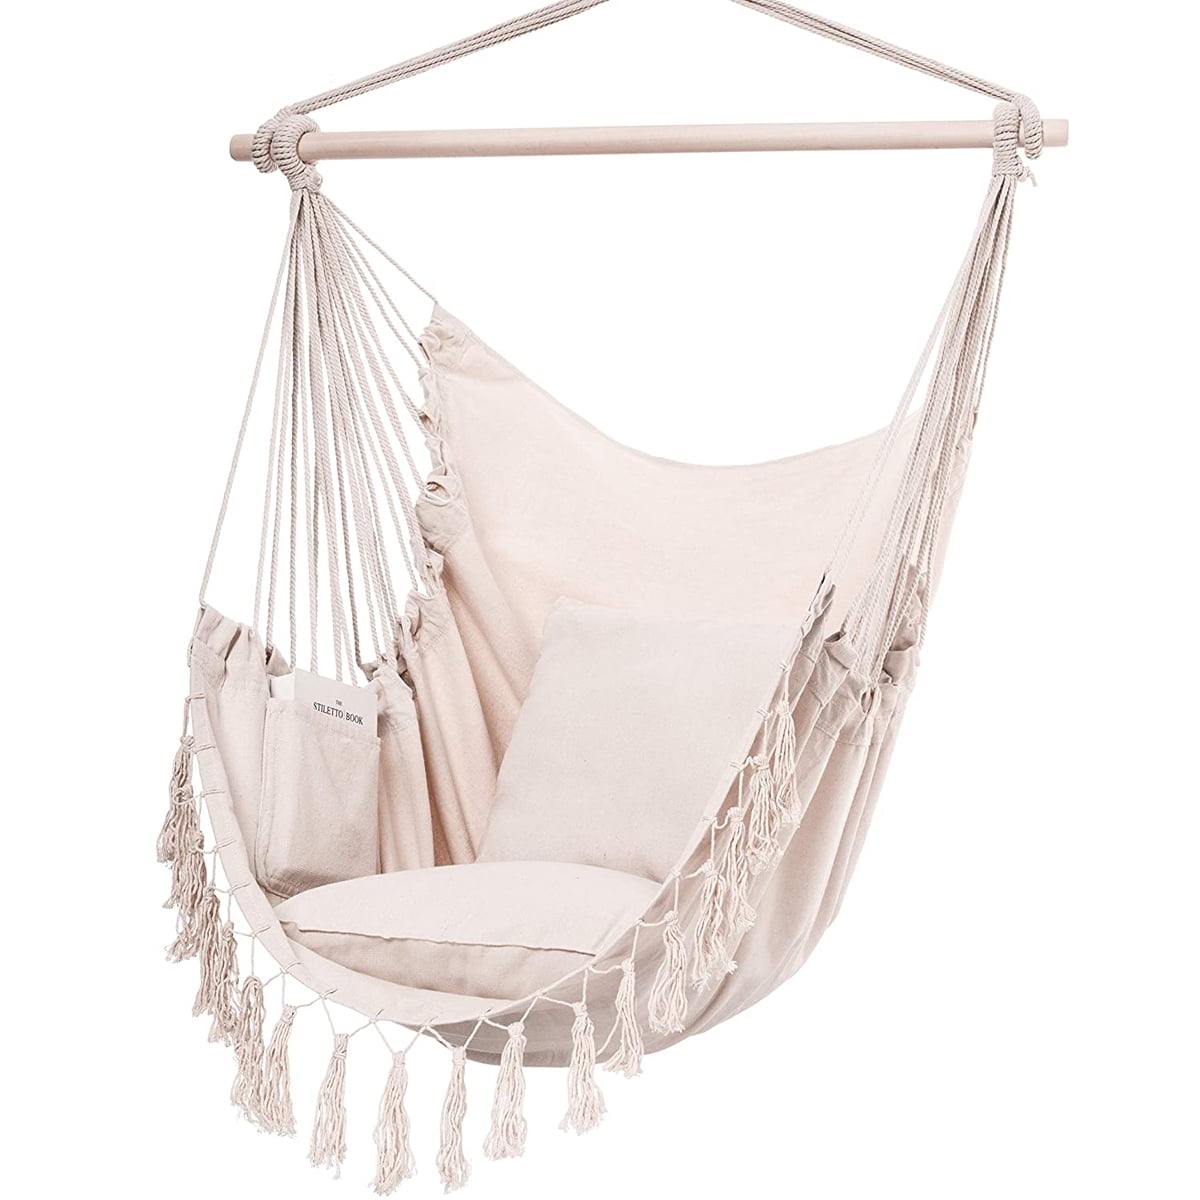 2 Seat Cushions Included Indoor/Outdoor Hanging Rope Hammock Chair Swing Bed 